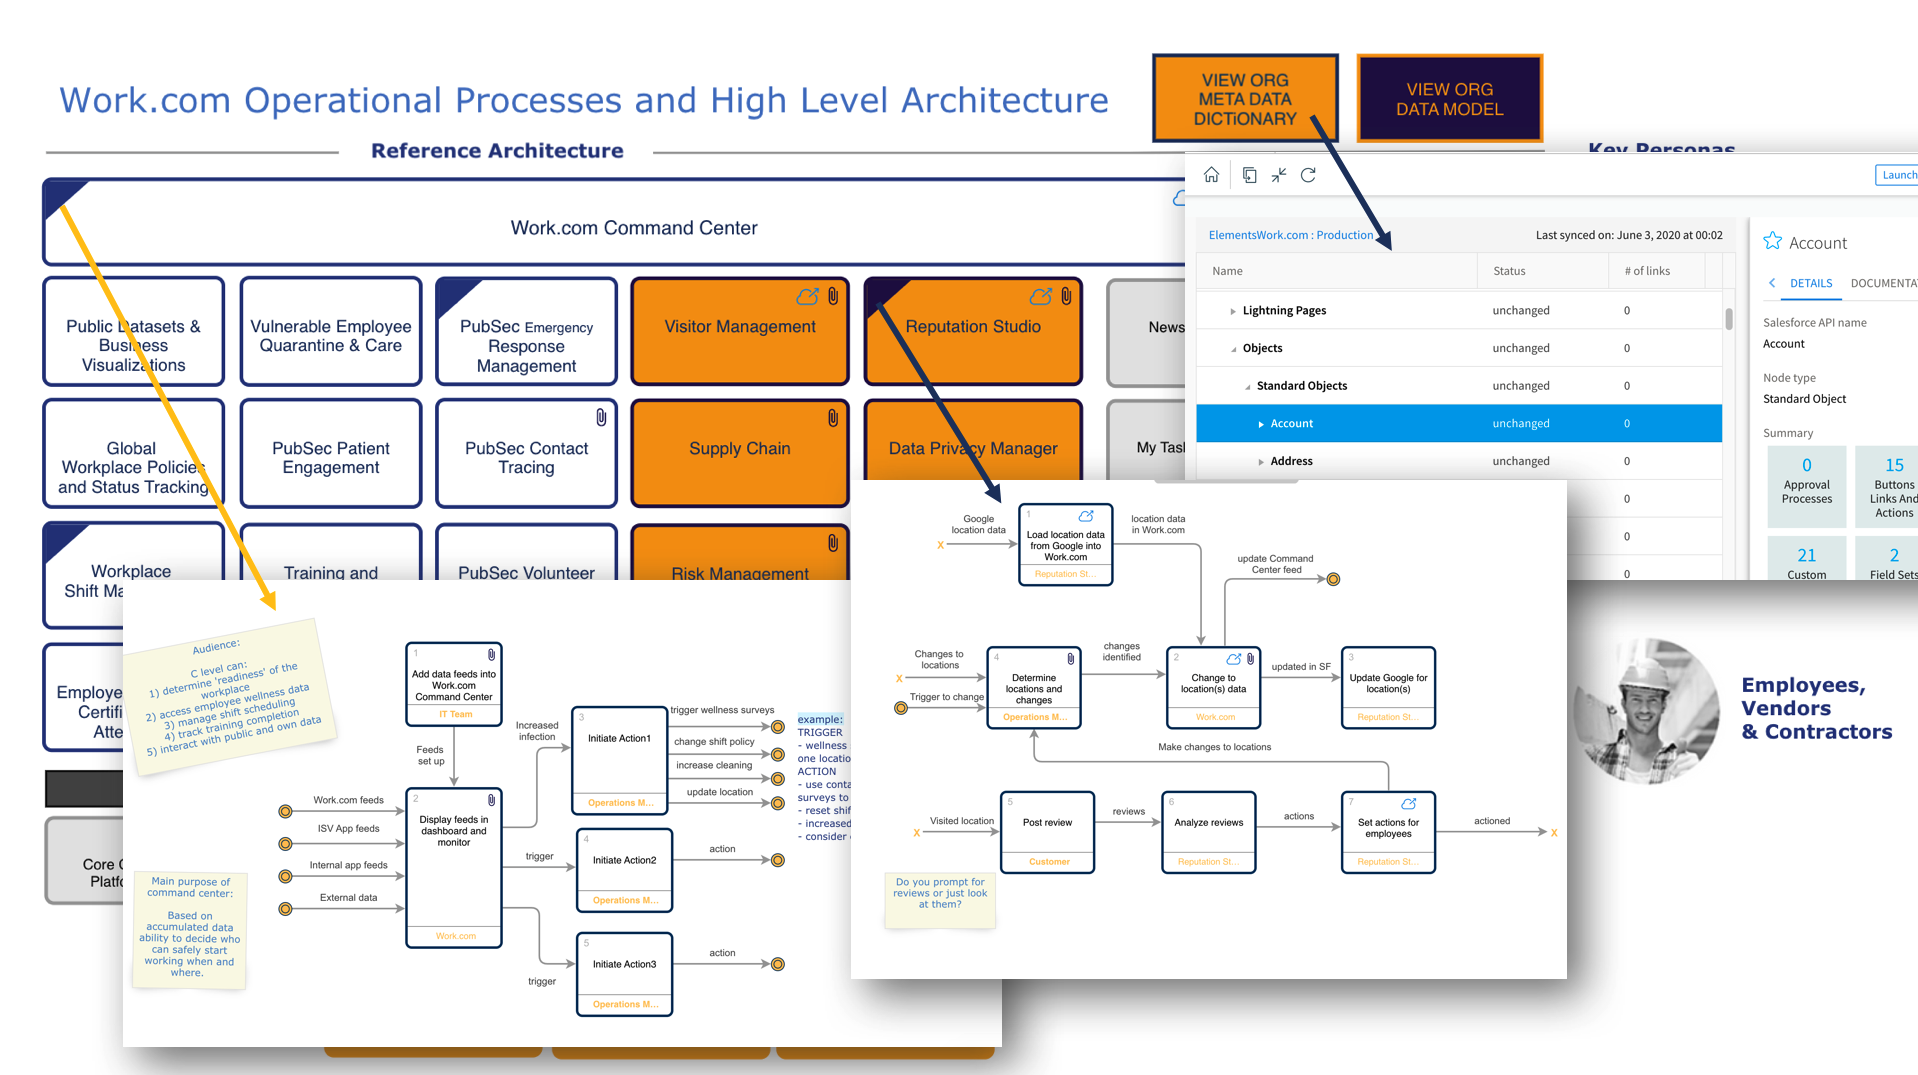 Work.com Operational Processes and High Level Architecture